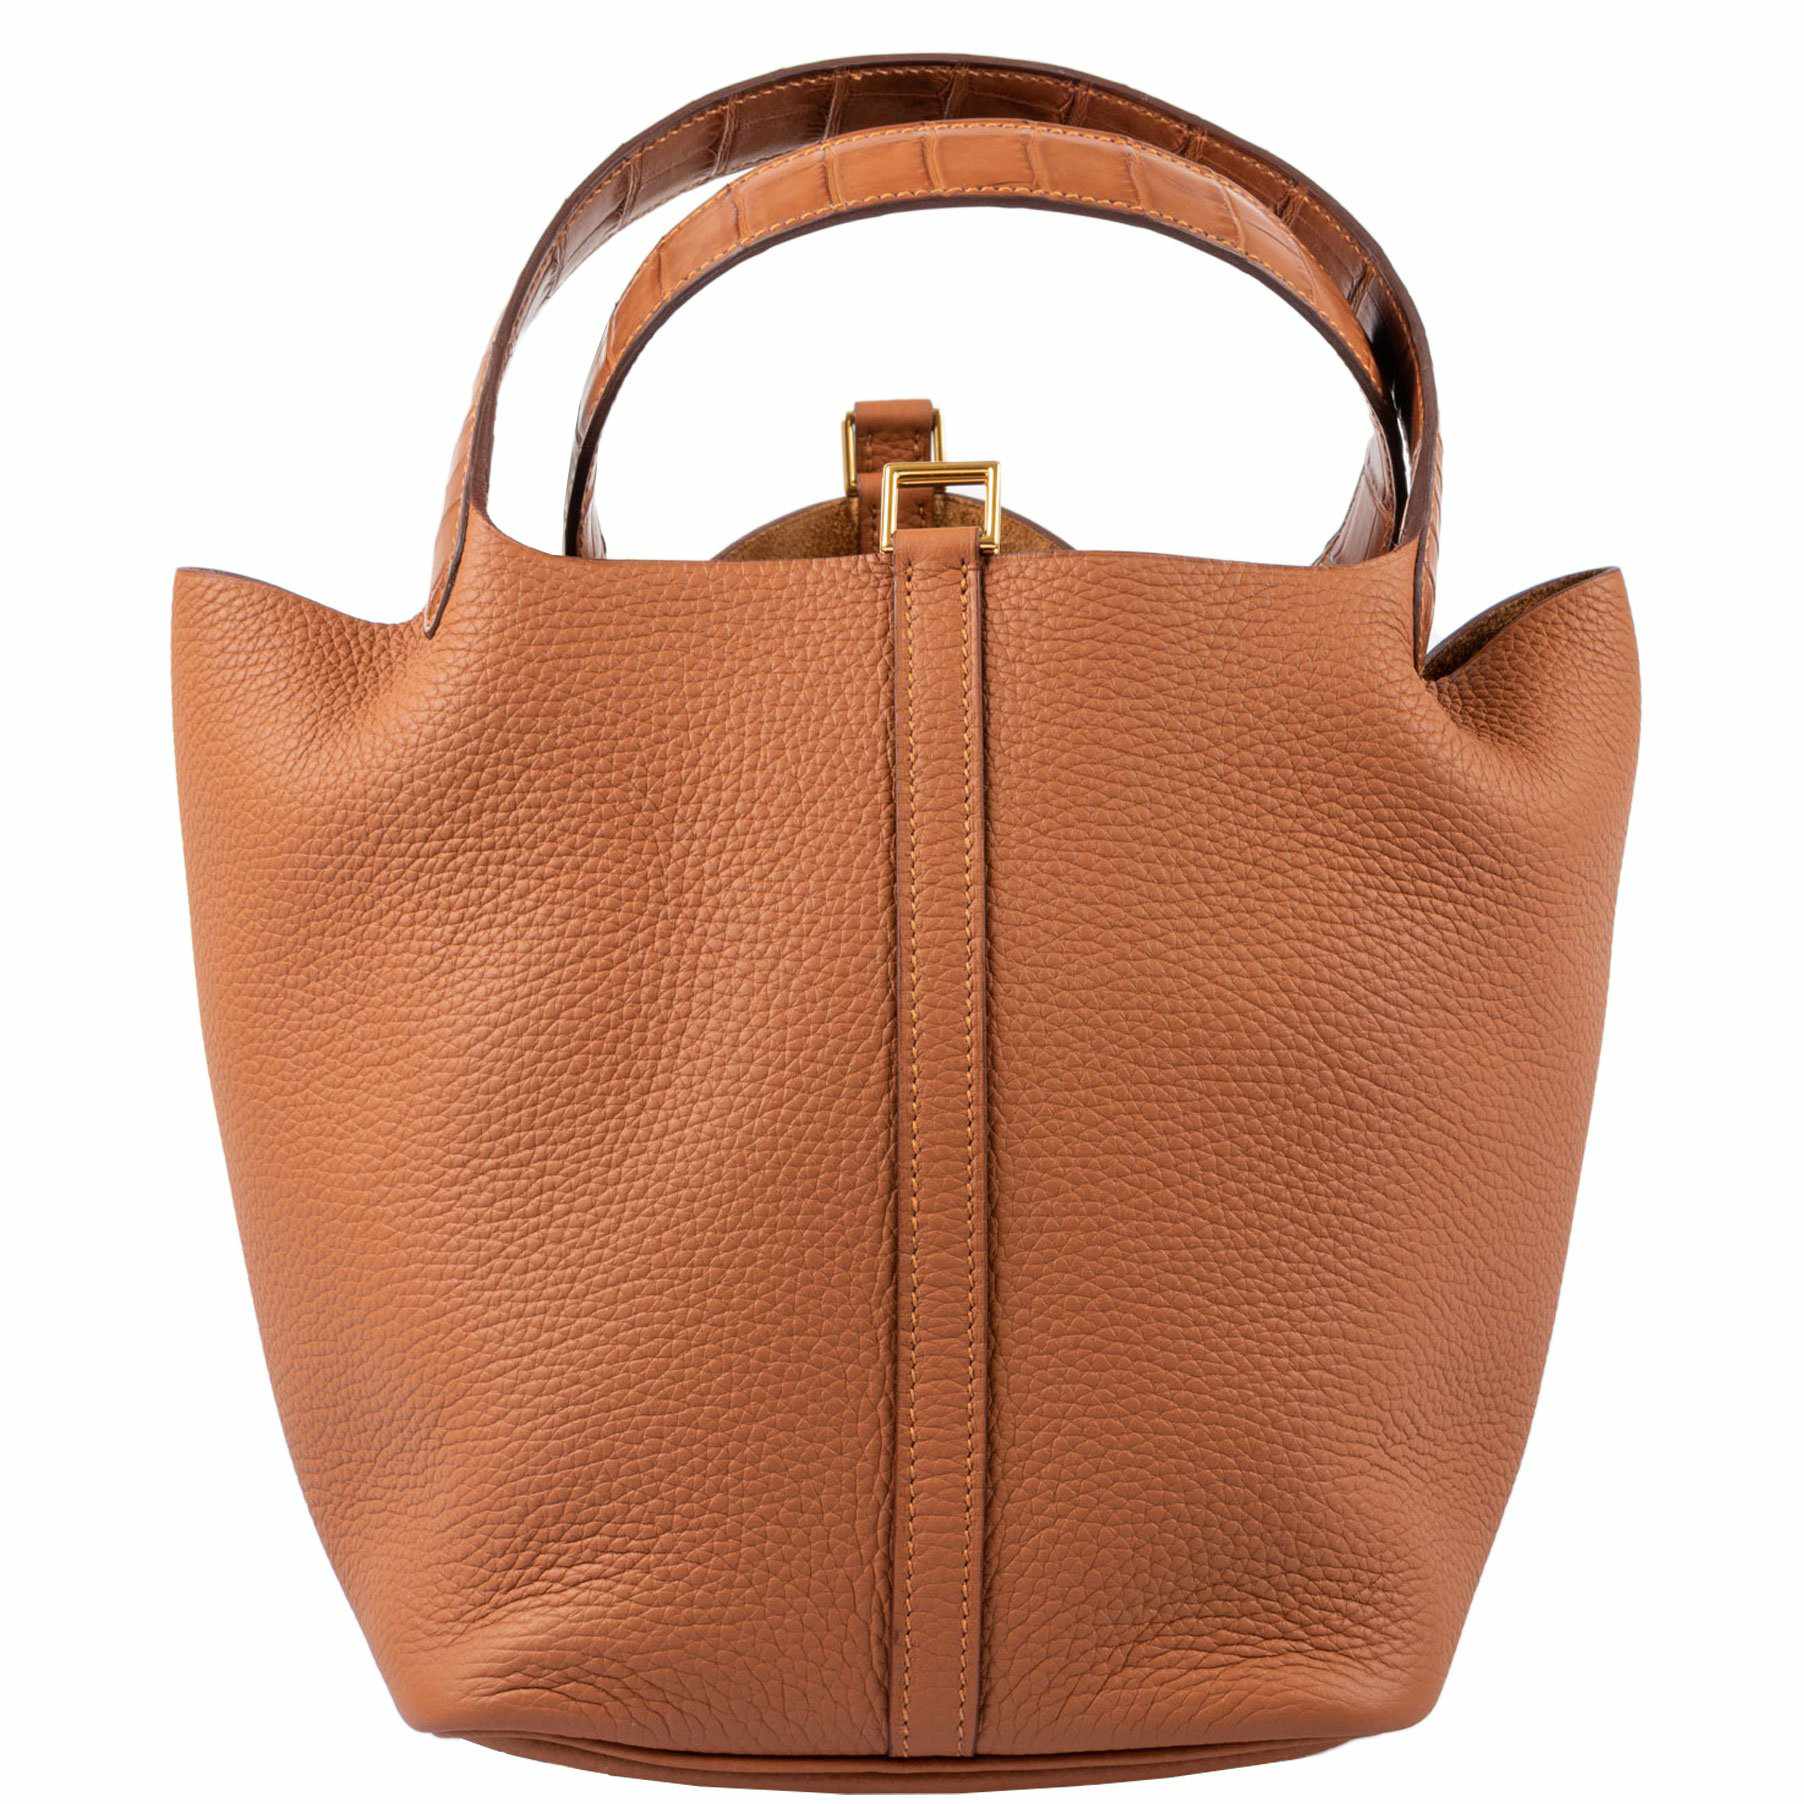 Hermes Etoupe Clemence So Kelly 22 - Authentic Hermes Bags CA